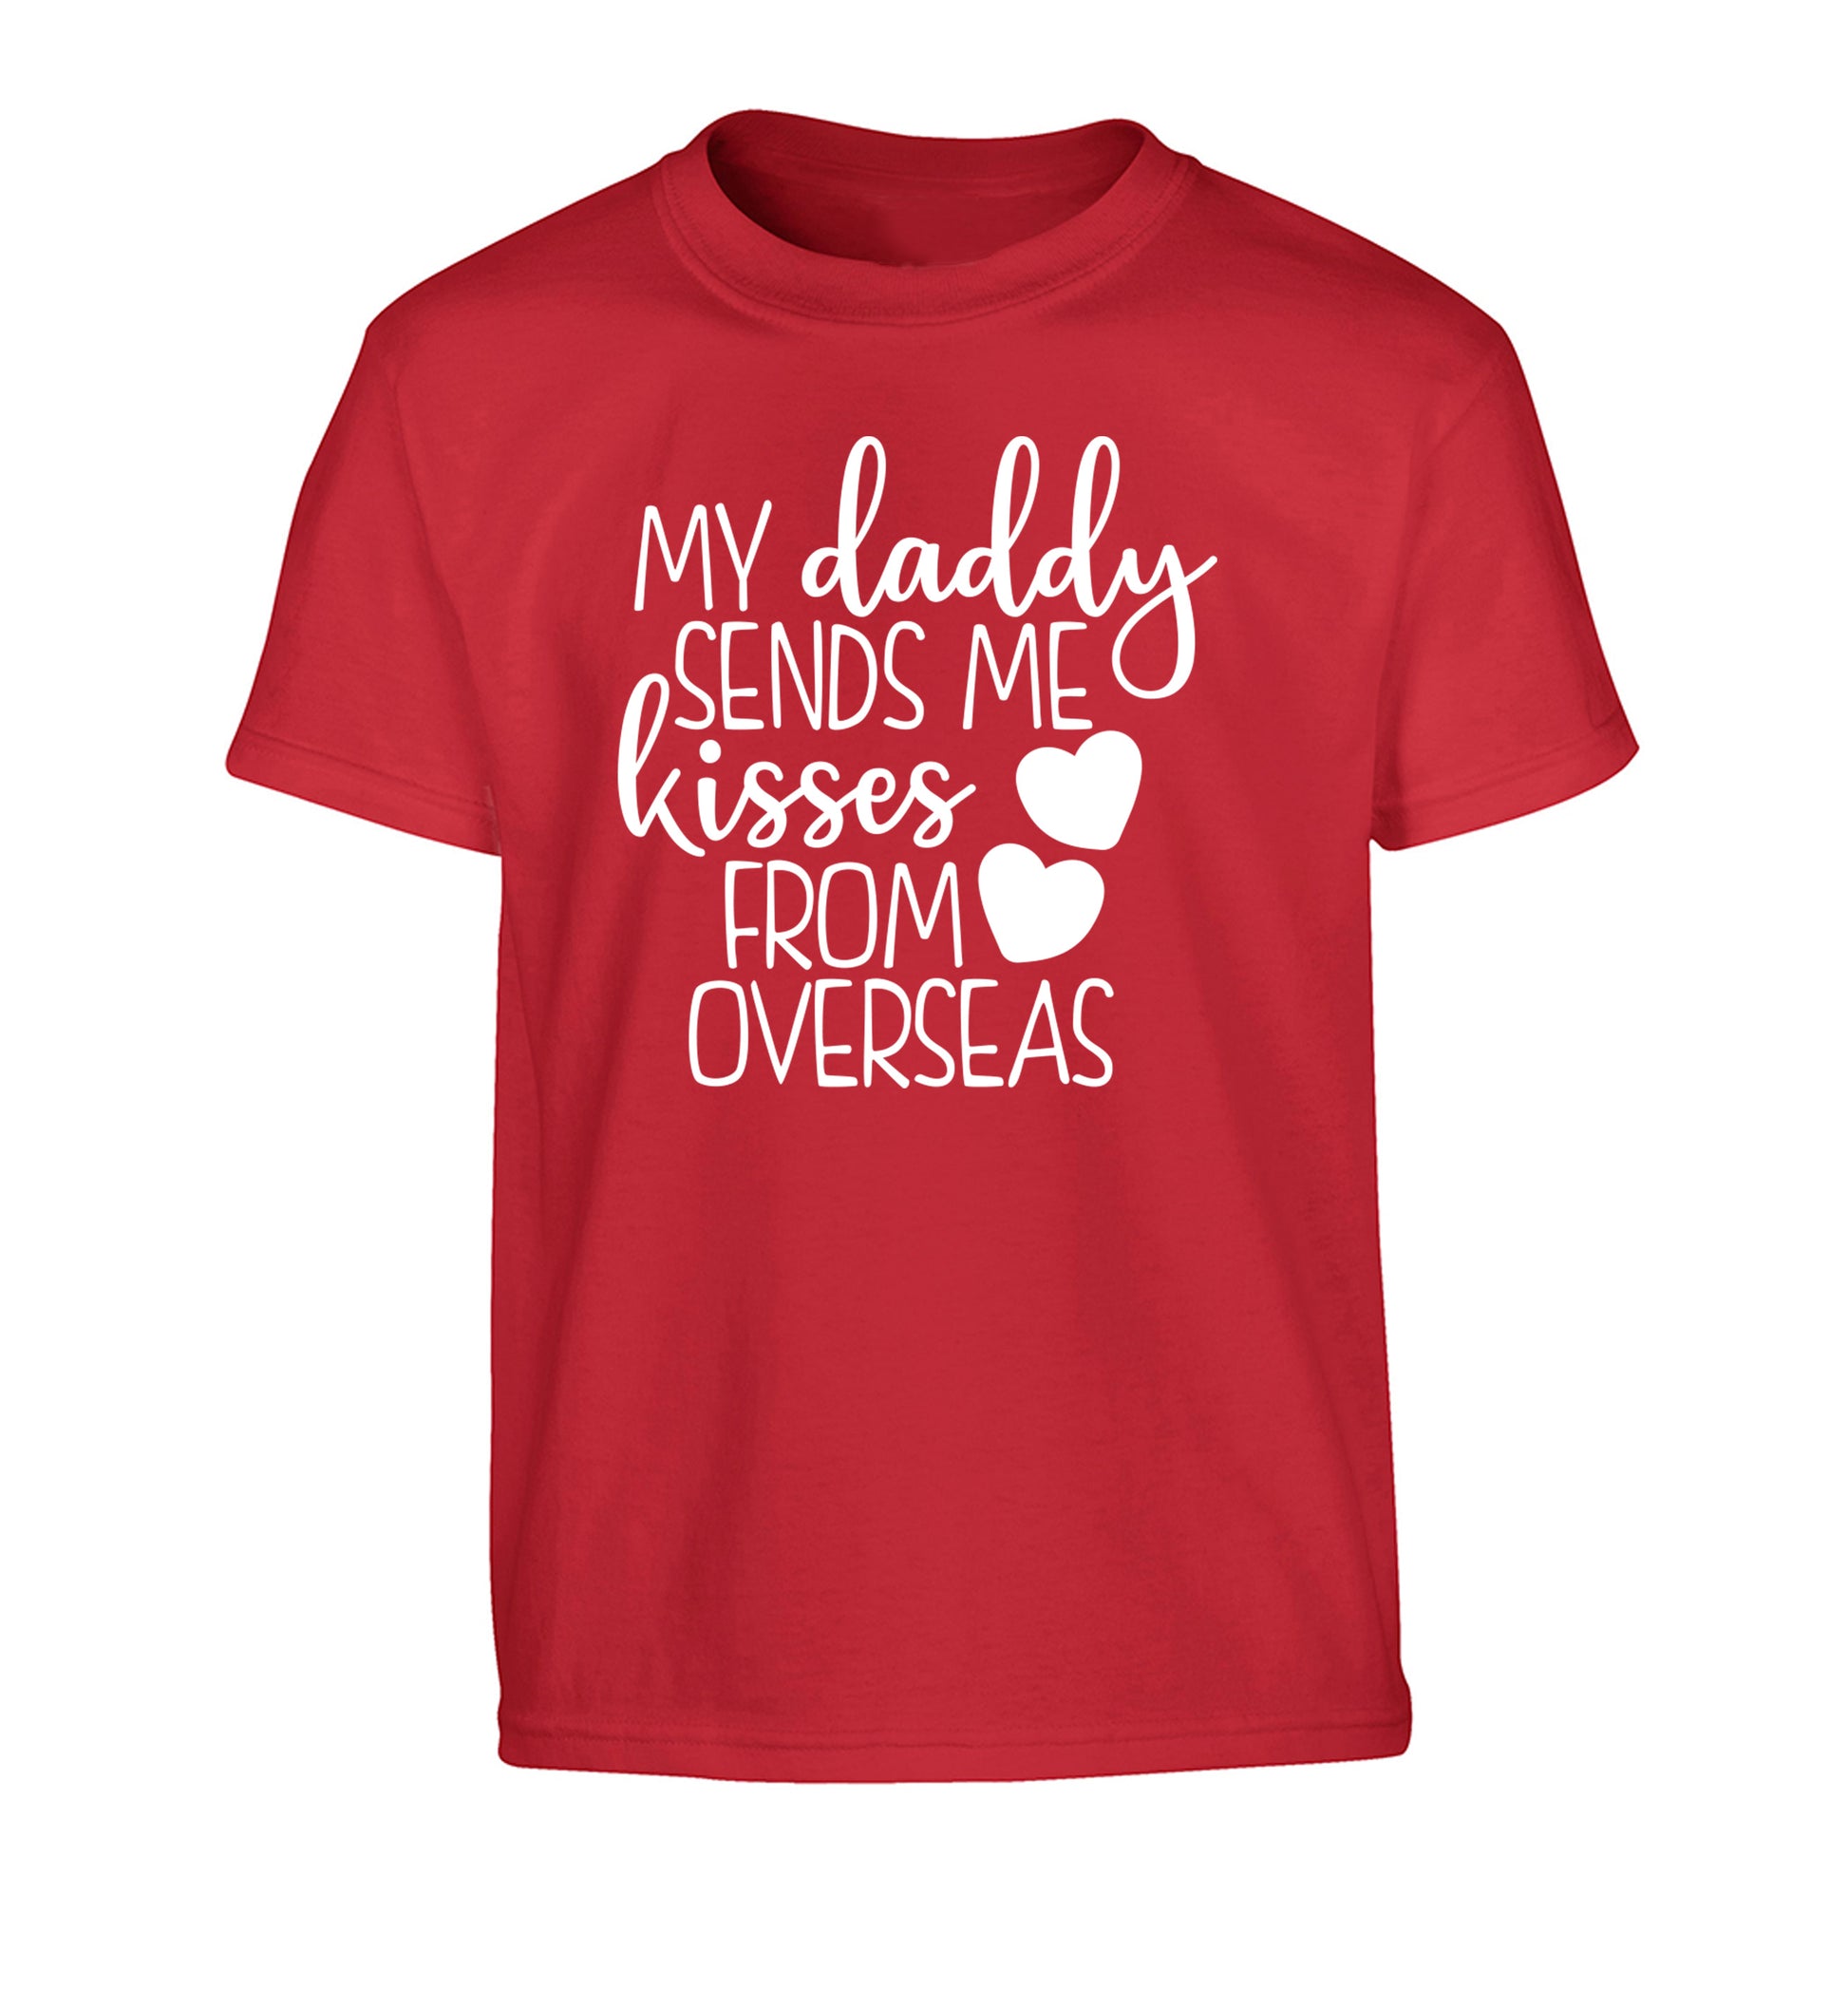 My daddy sends me kisses from overseas Children's red Tshirt 12-13 Years